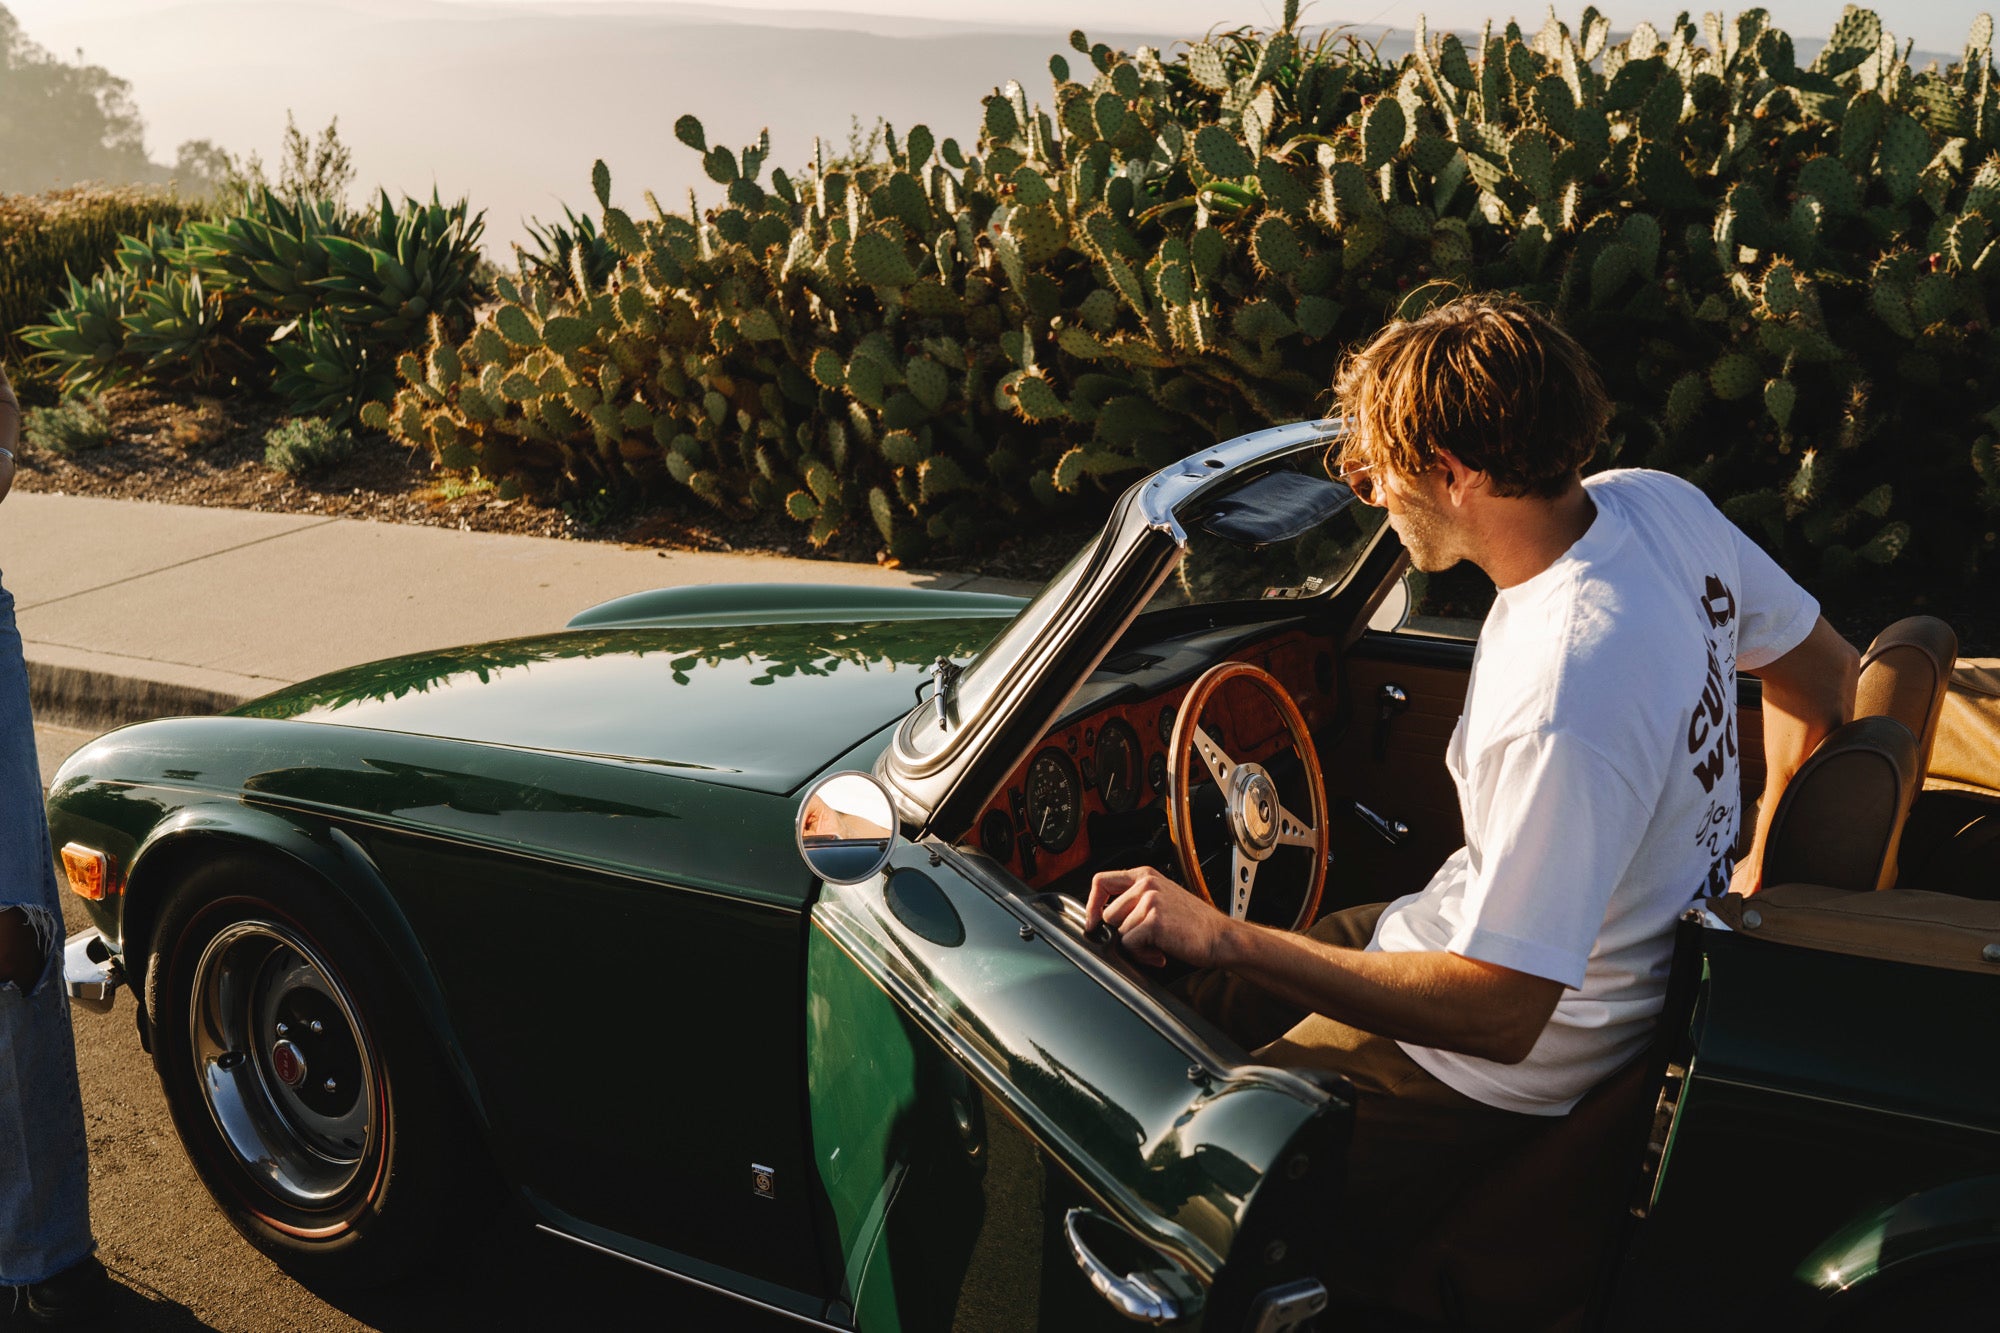 Man stepping into the driver’s seat of a green convertible car wearing a white Curly Wolf shirt. Cacti and ocean cliffs in the background.